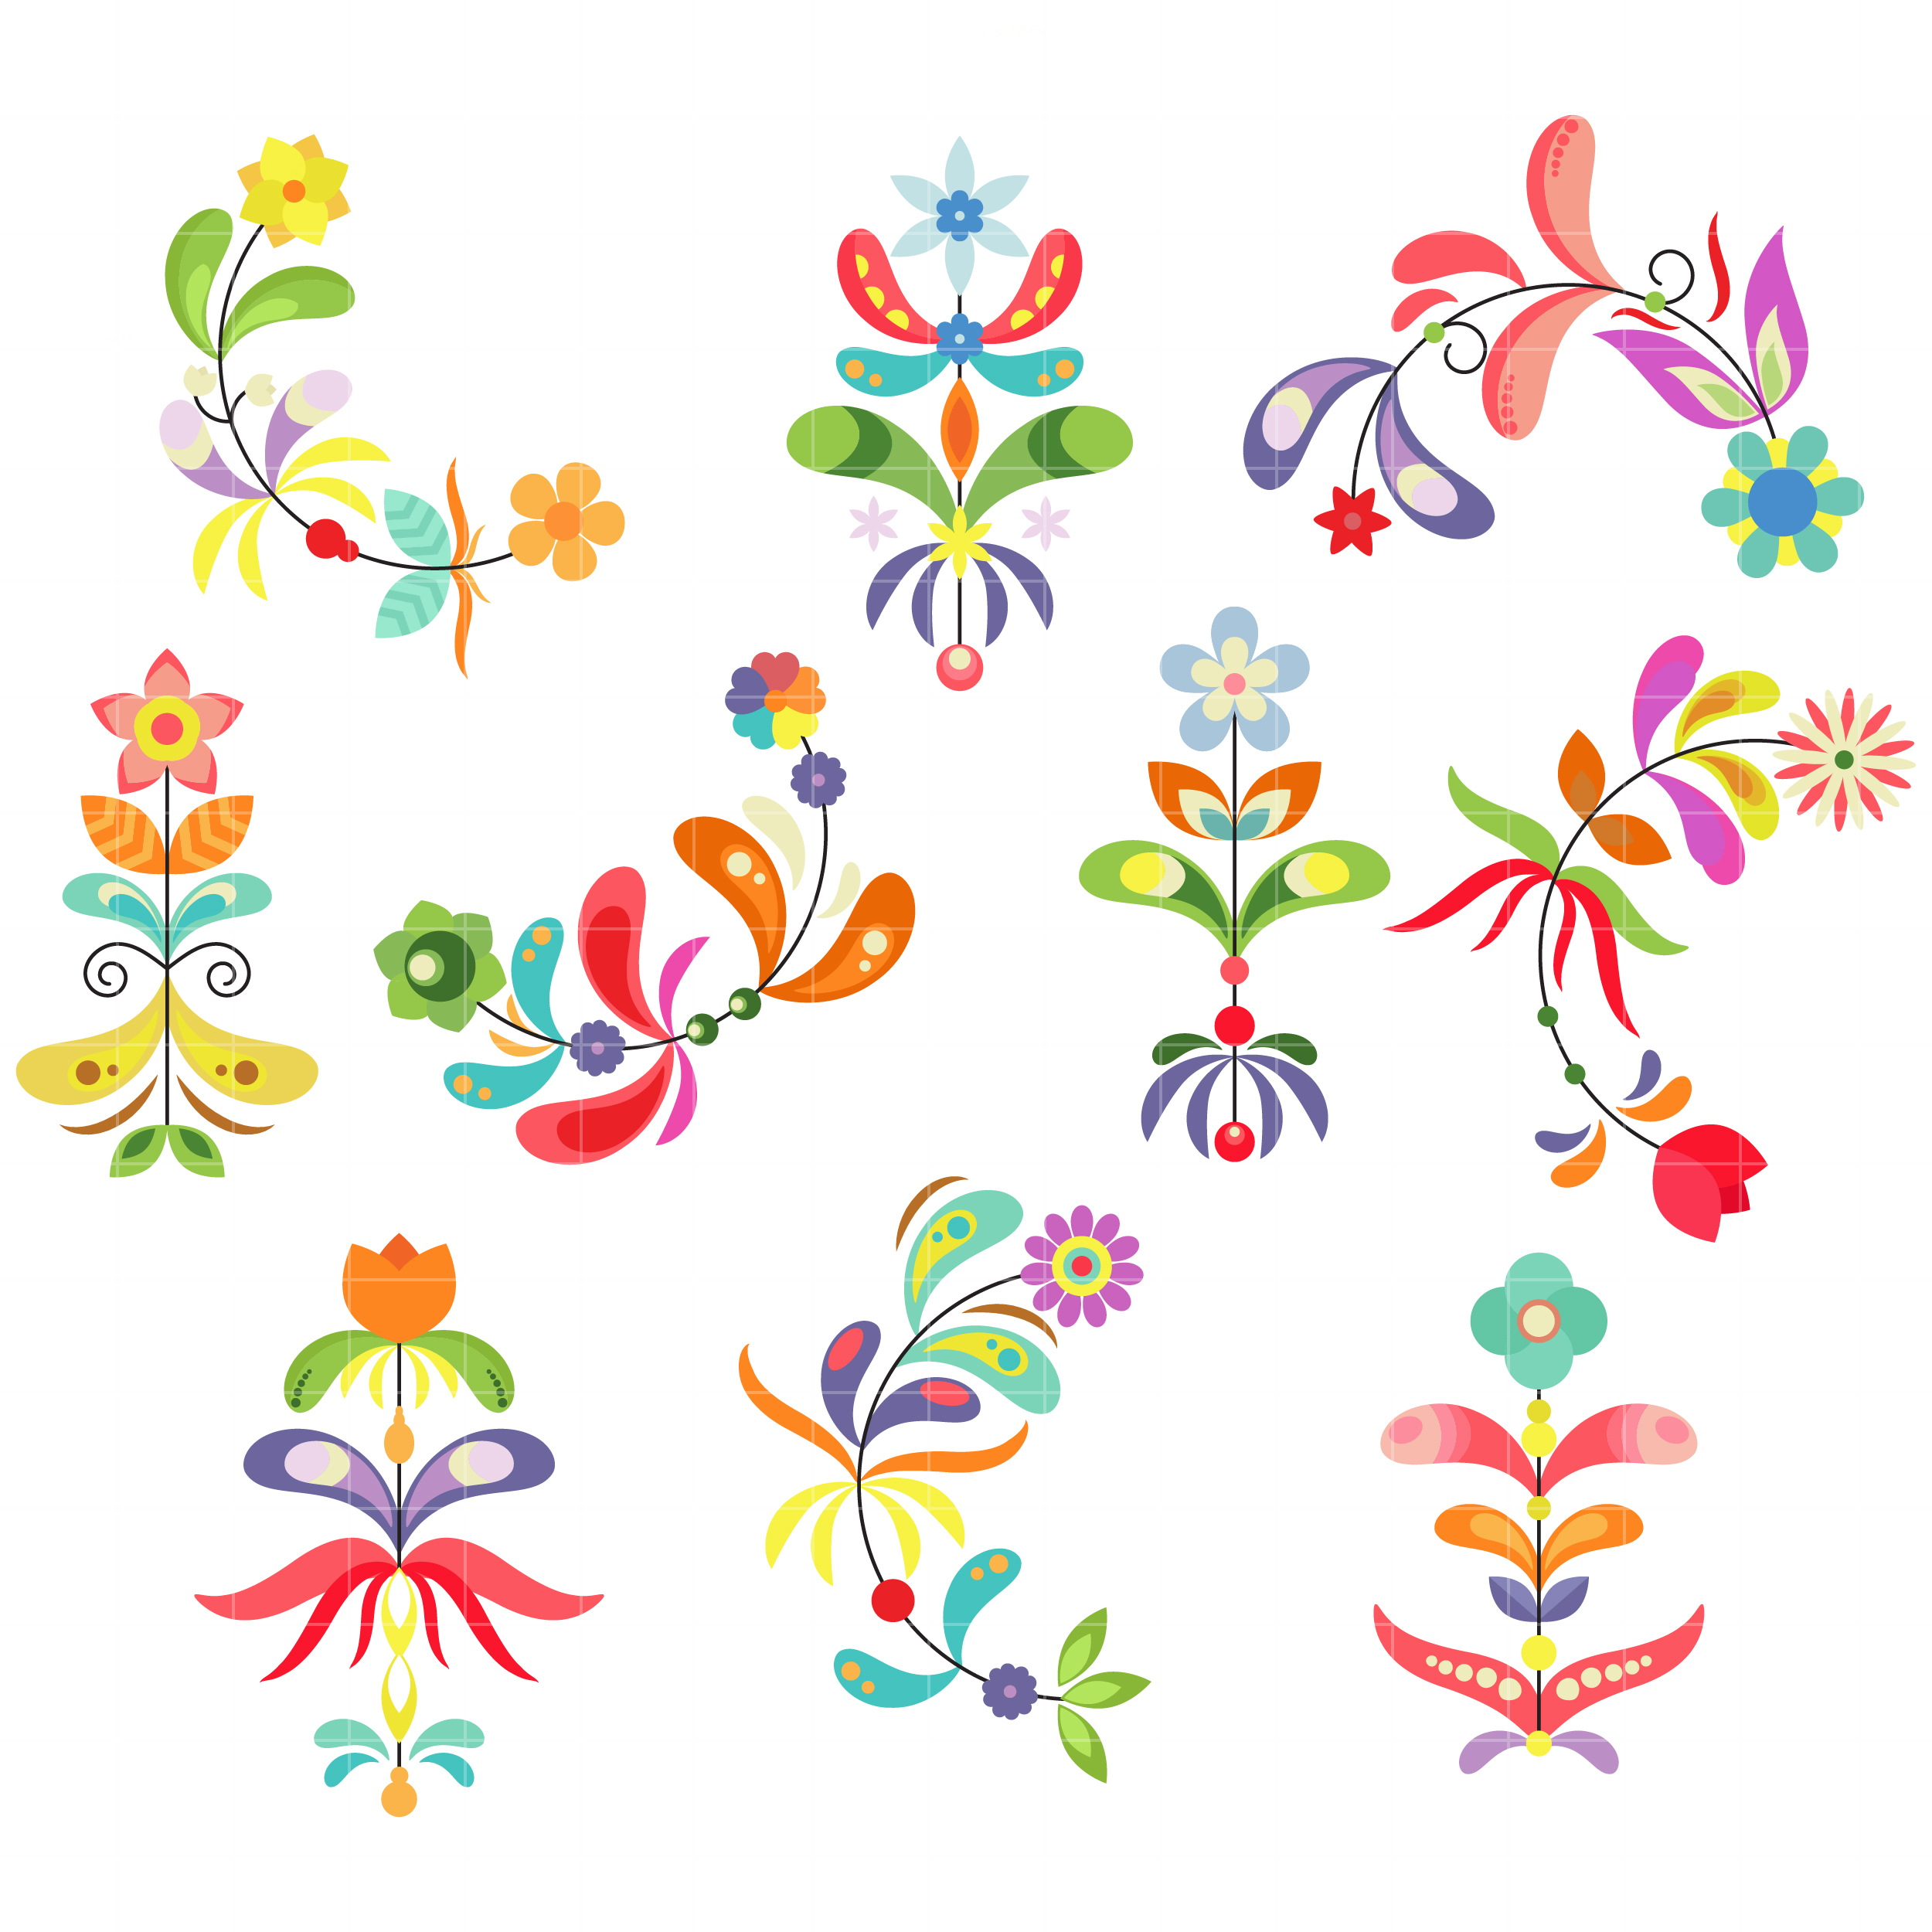 flower-patterns-arts-set-semi-exclusive-clip-art-set-for-digitizing-and